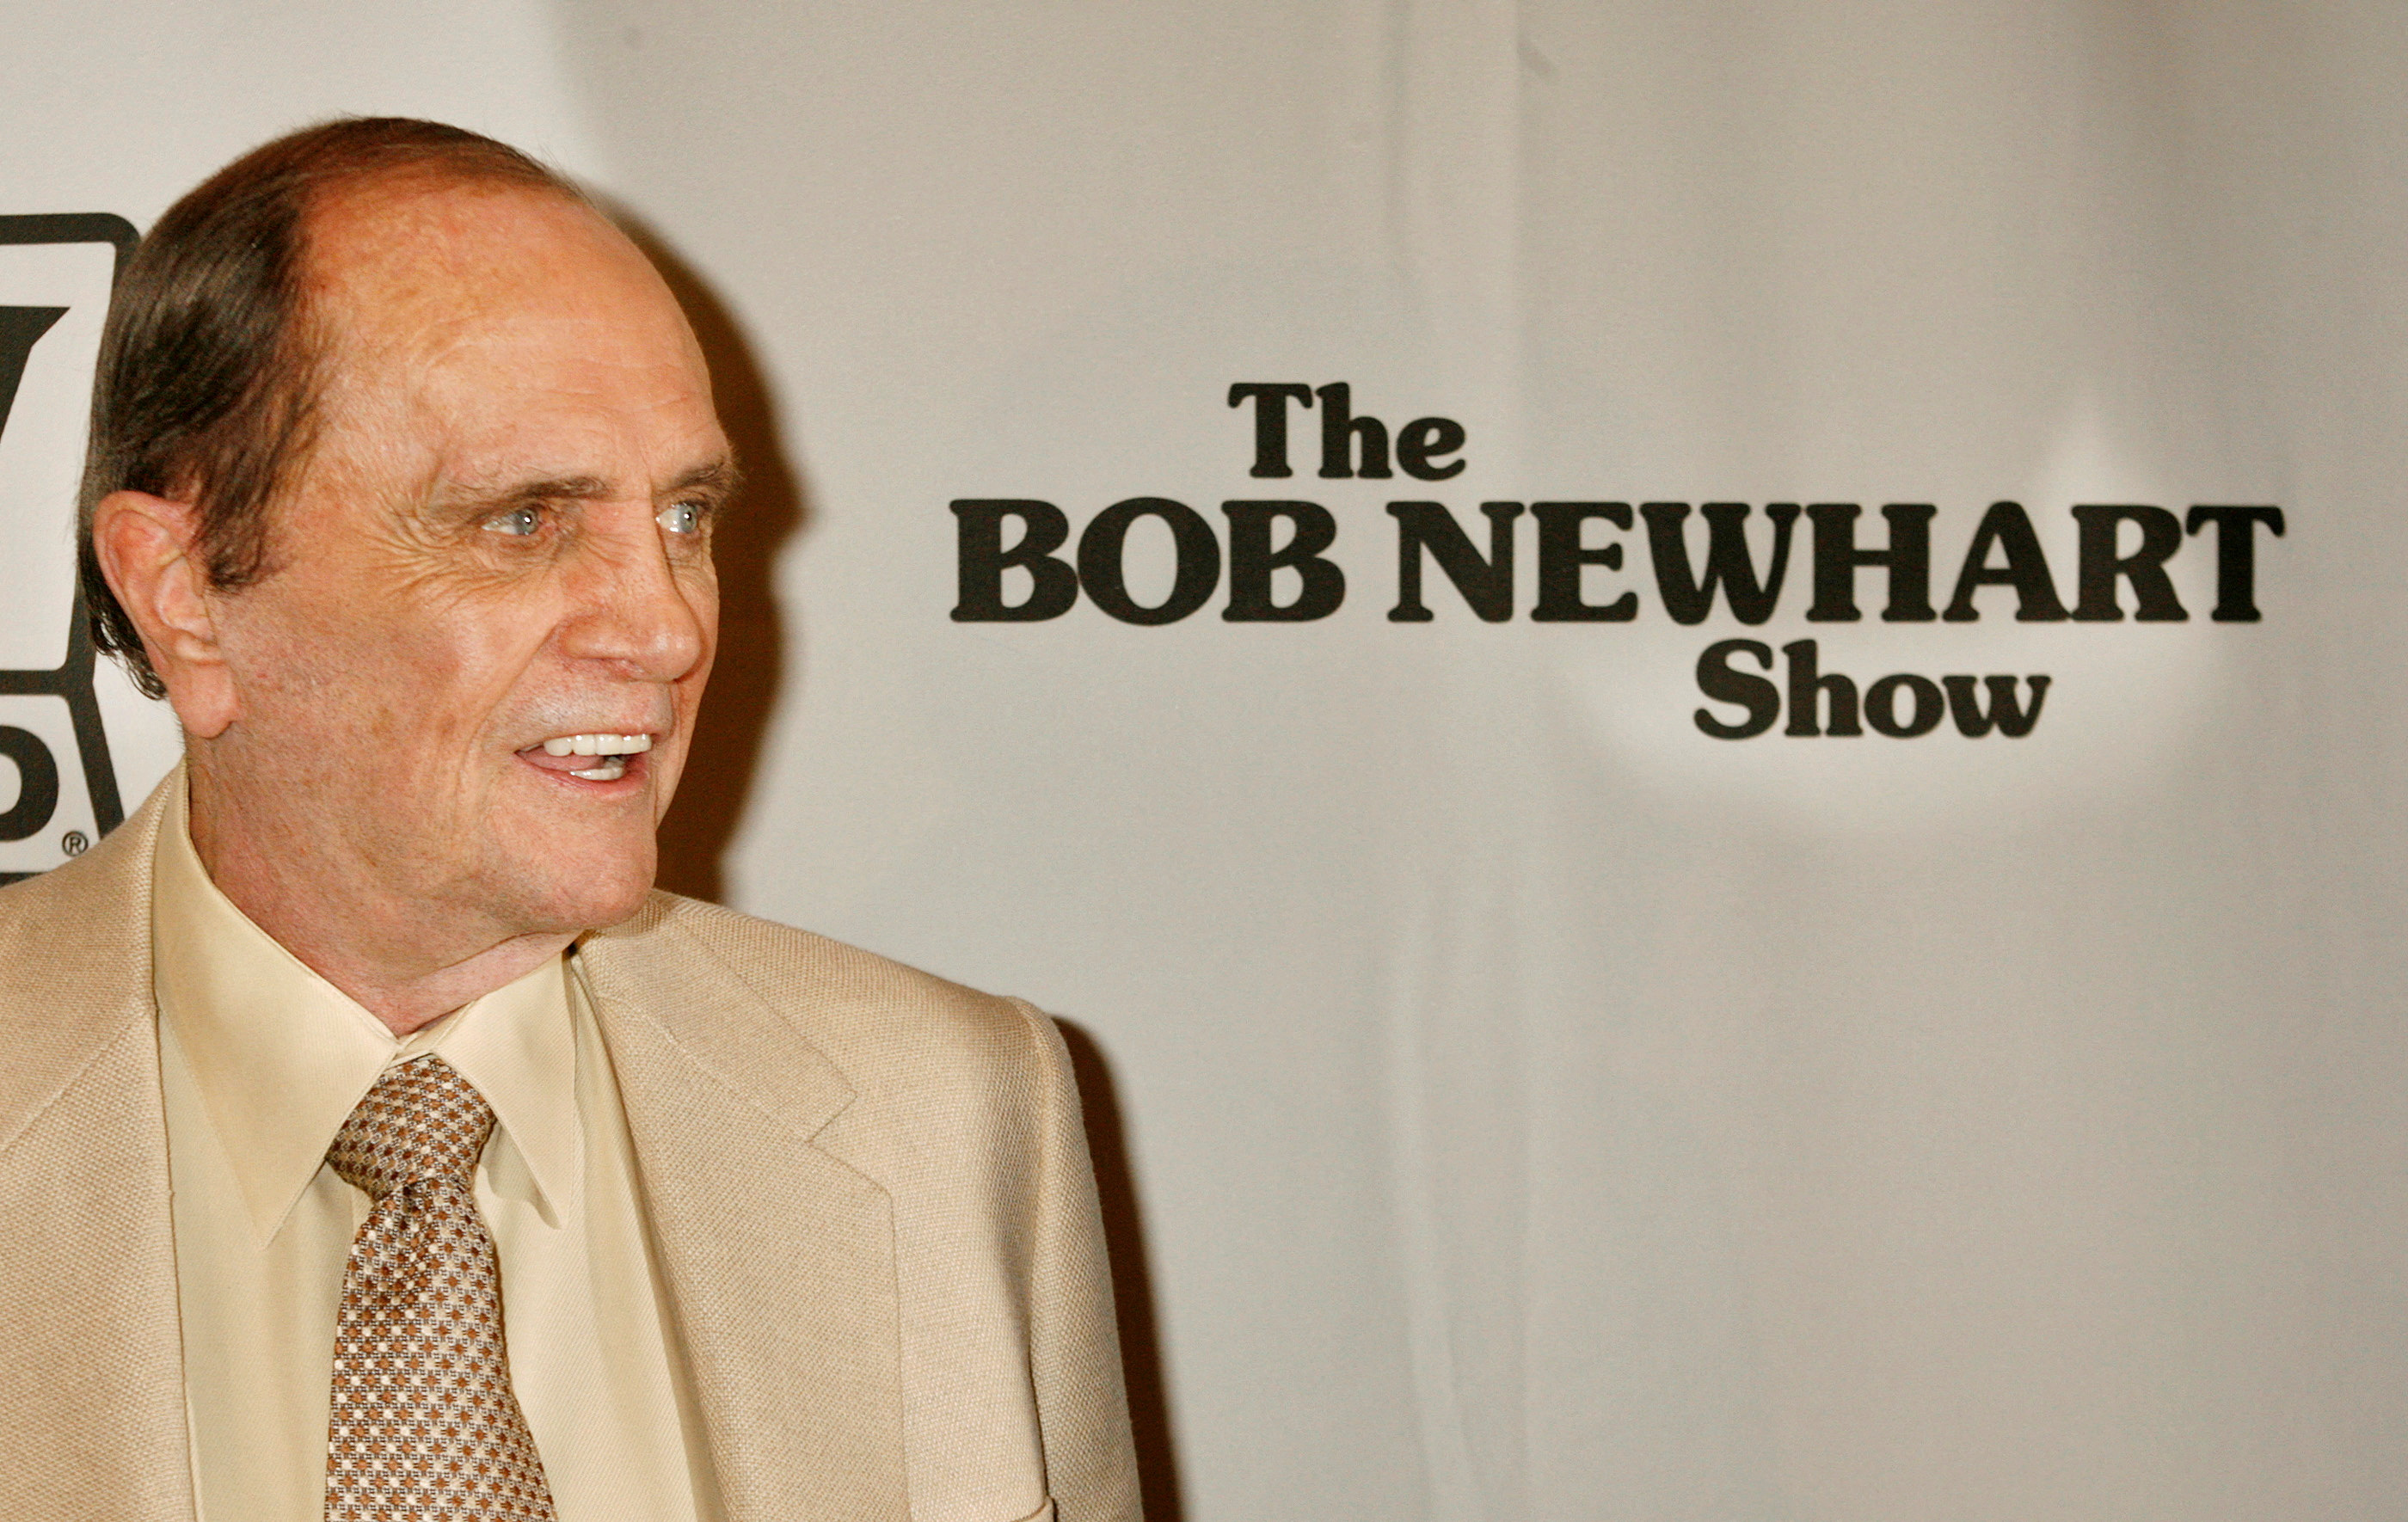 Bob Newhart, famous for deadpan humour, dies at age 94